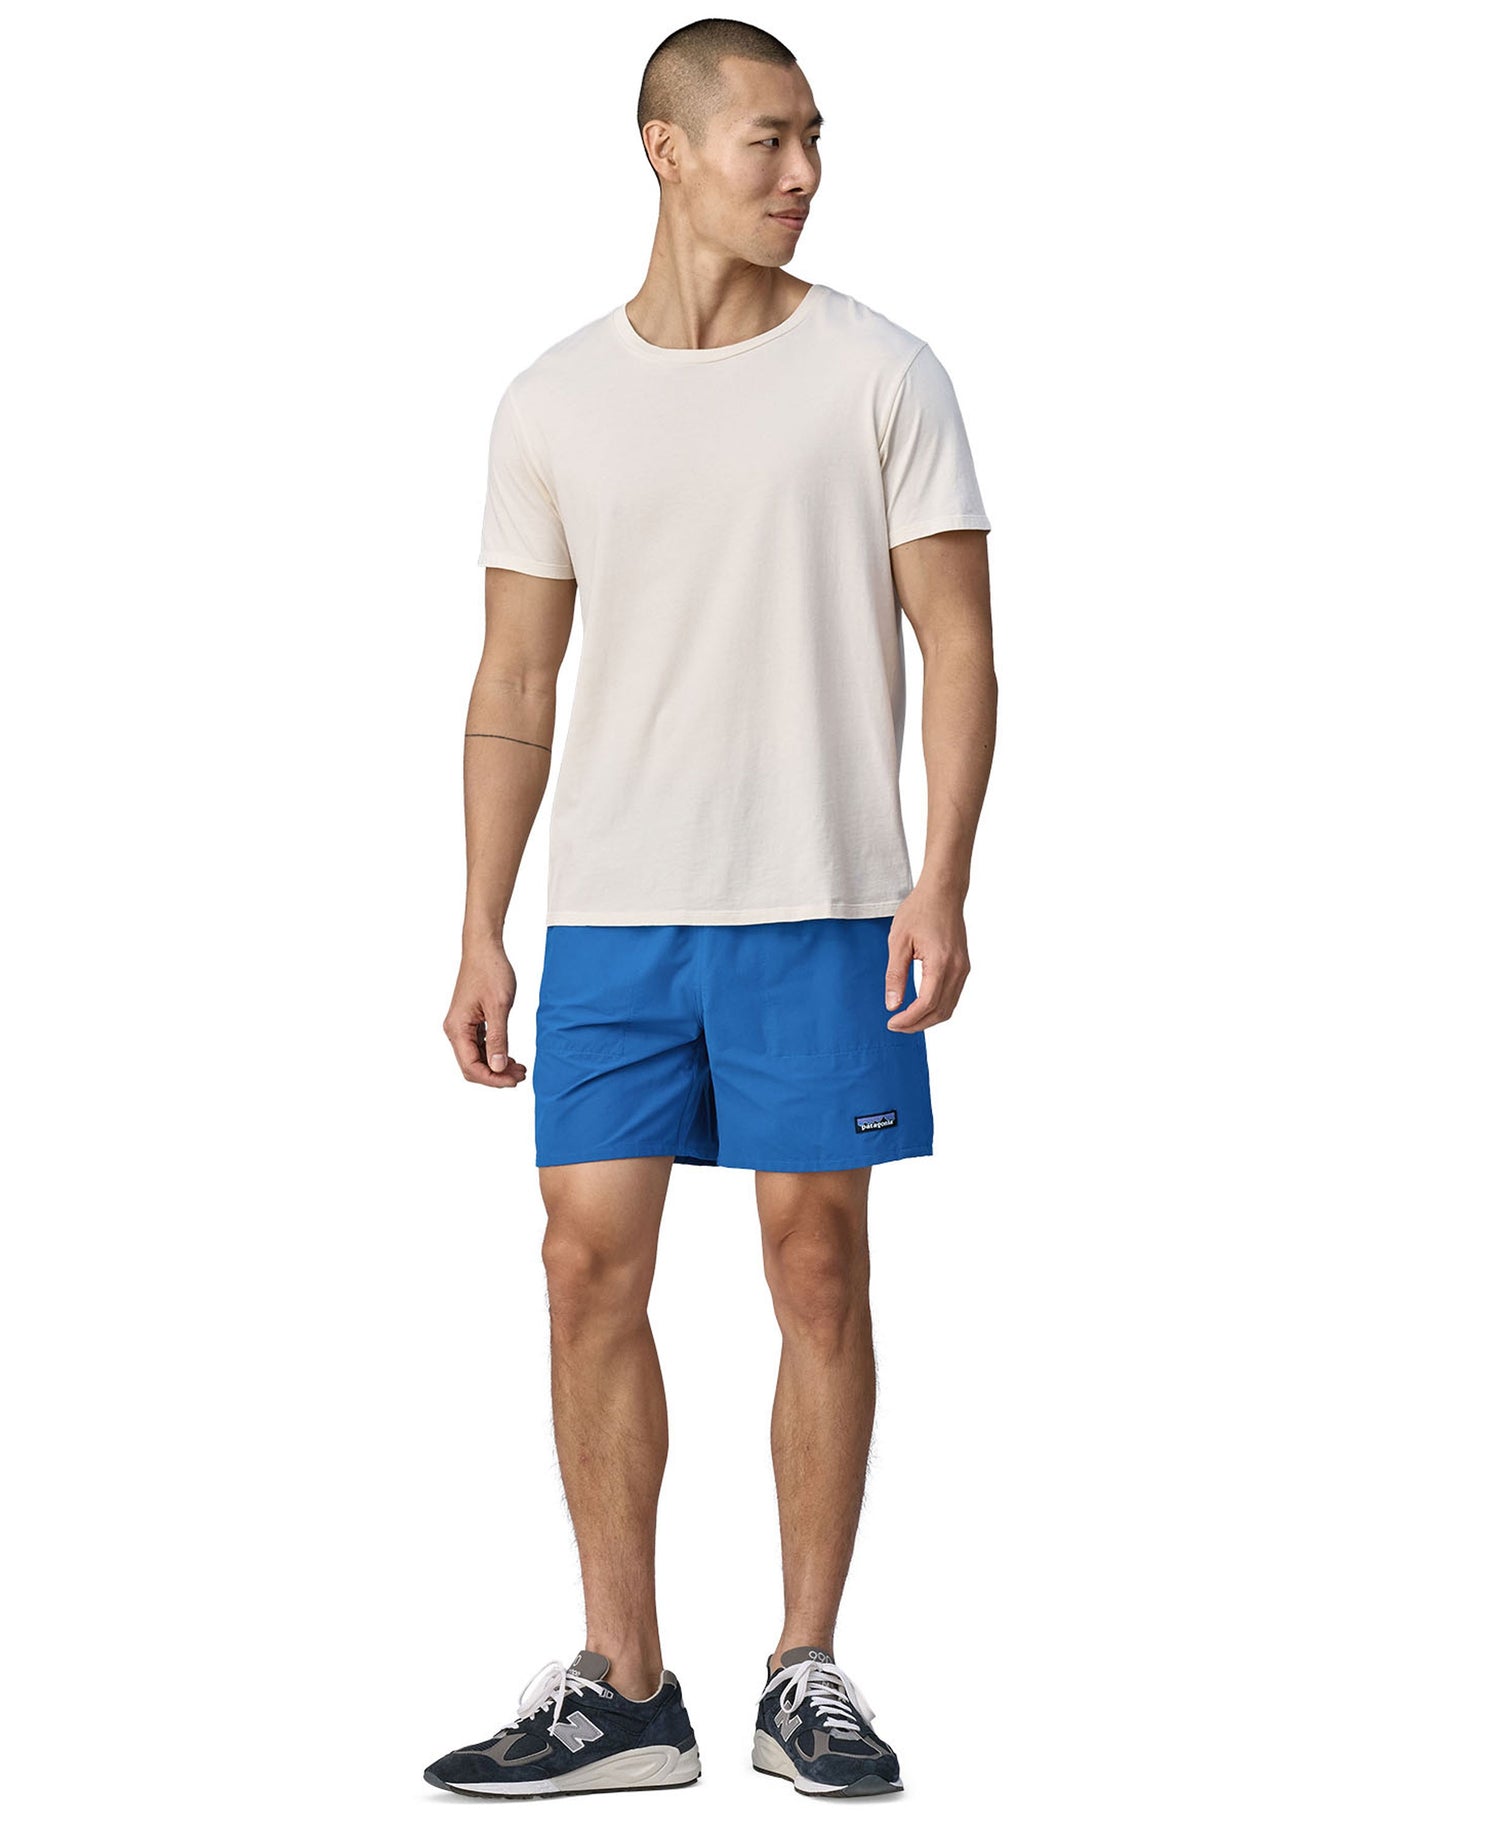 Baggies Lights 6.5in Shorts - Endless Blue